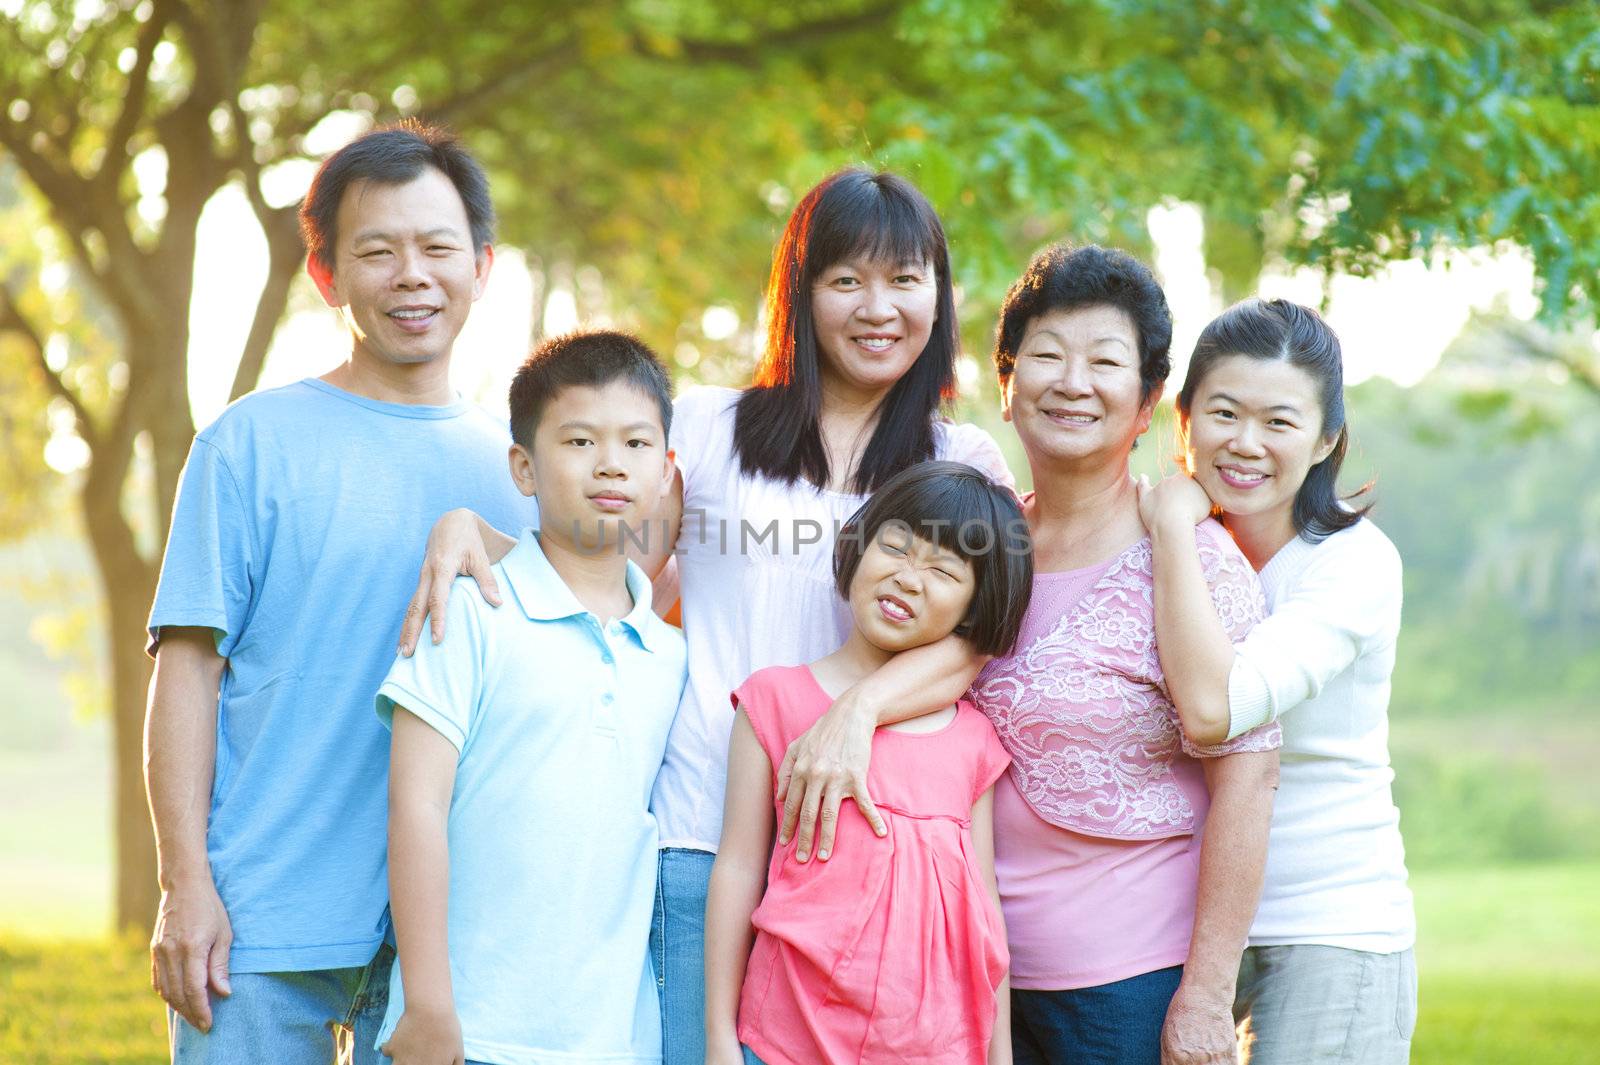 Asian family having a great time at outdoor park